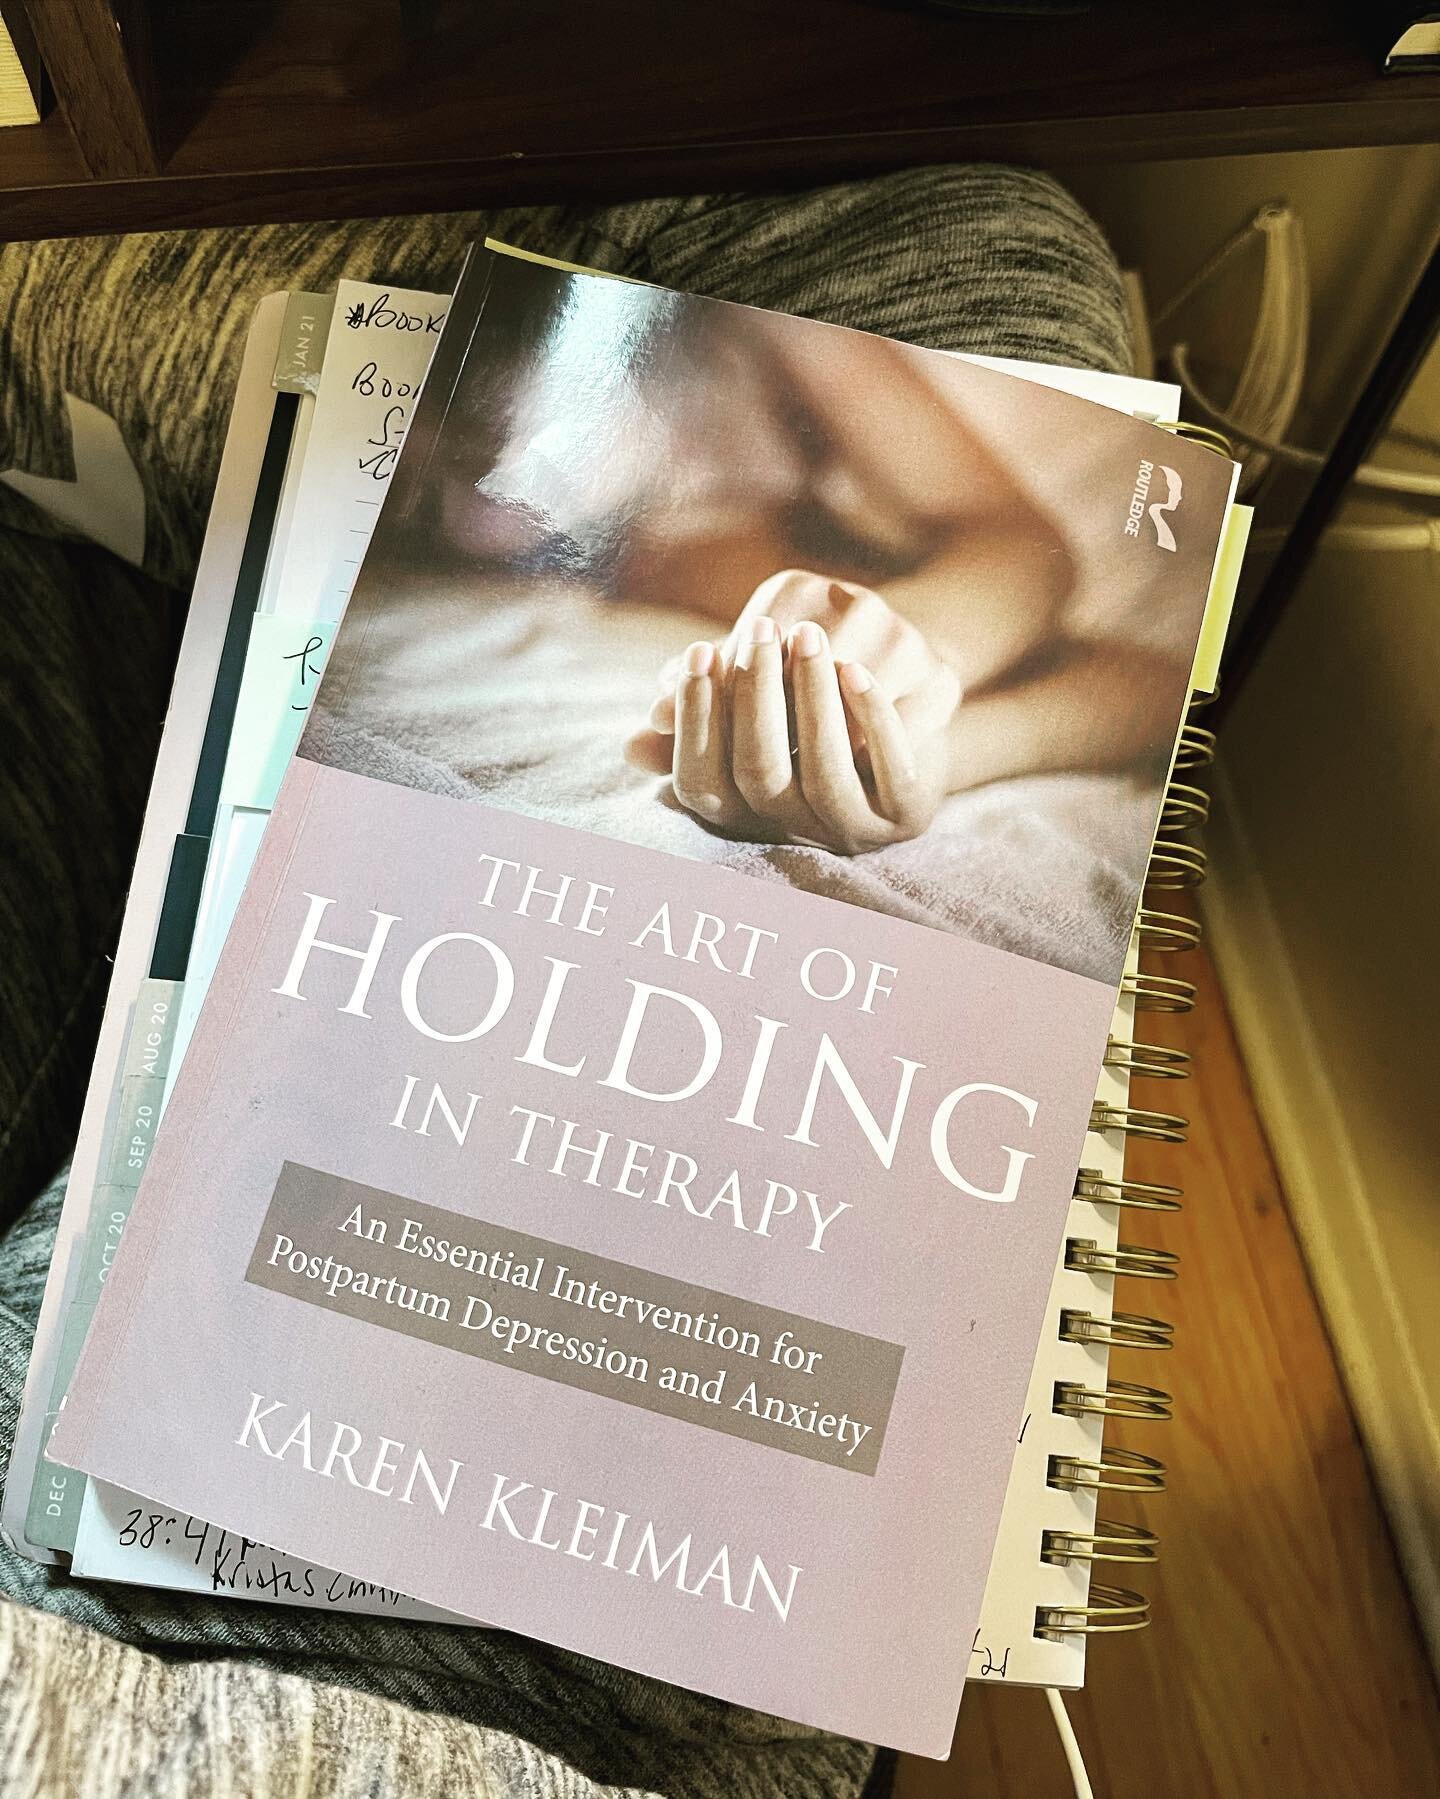 A book I highly recommend for any clinician working with postpartum women. This book reaffirmed so many of my approaches when working with postpartum women. 

It&rsquo;s so important to note that when working with postpartum women traditional and typ